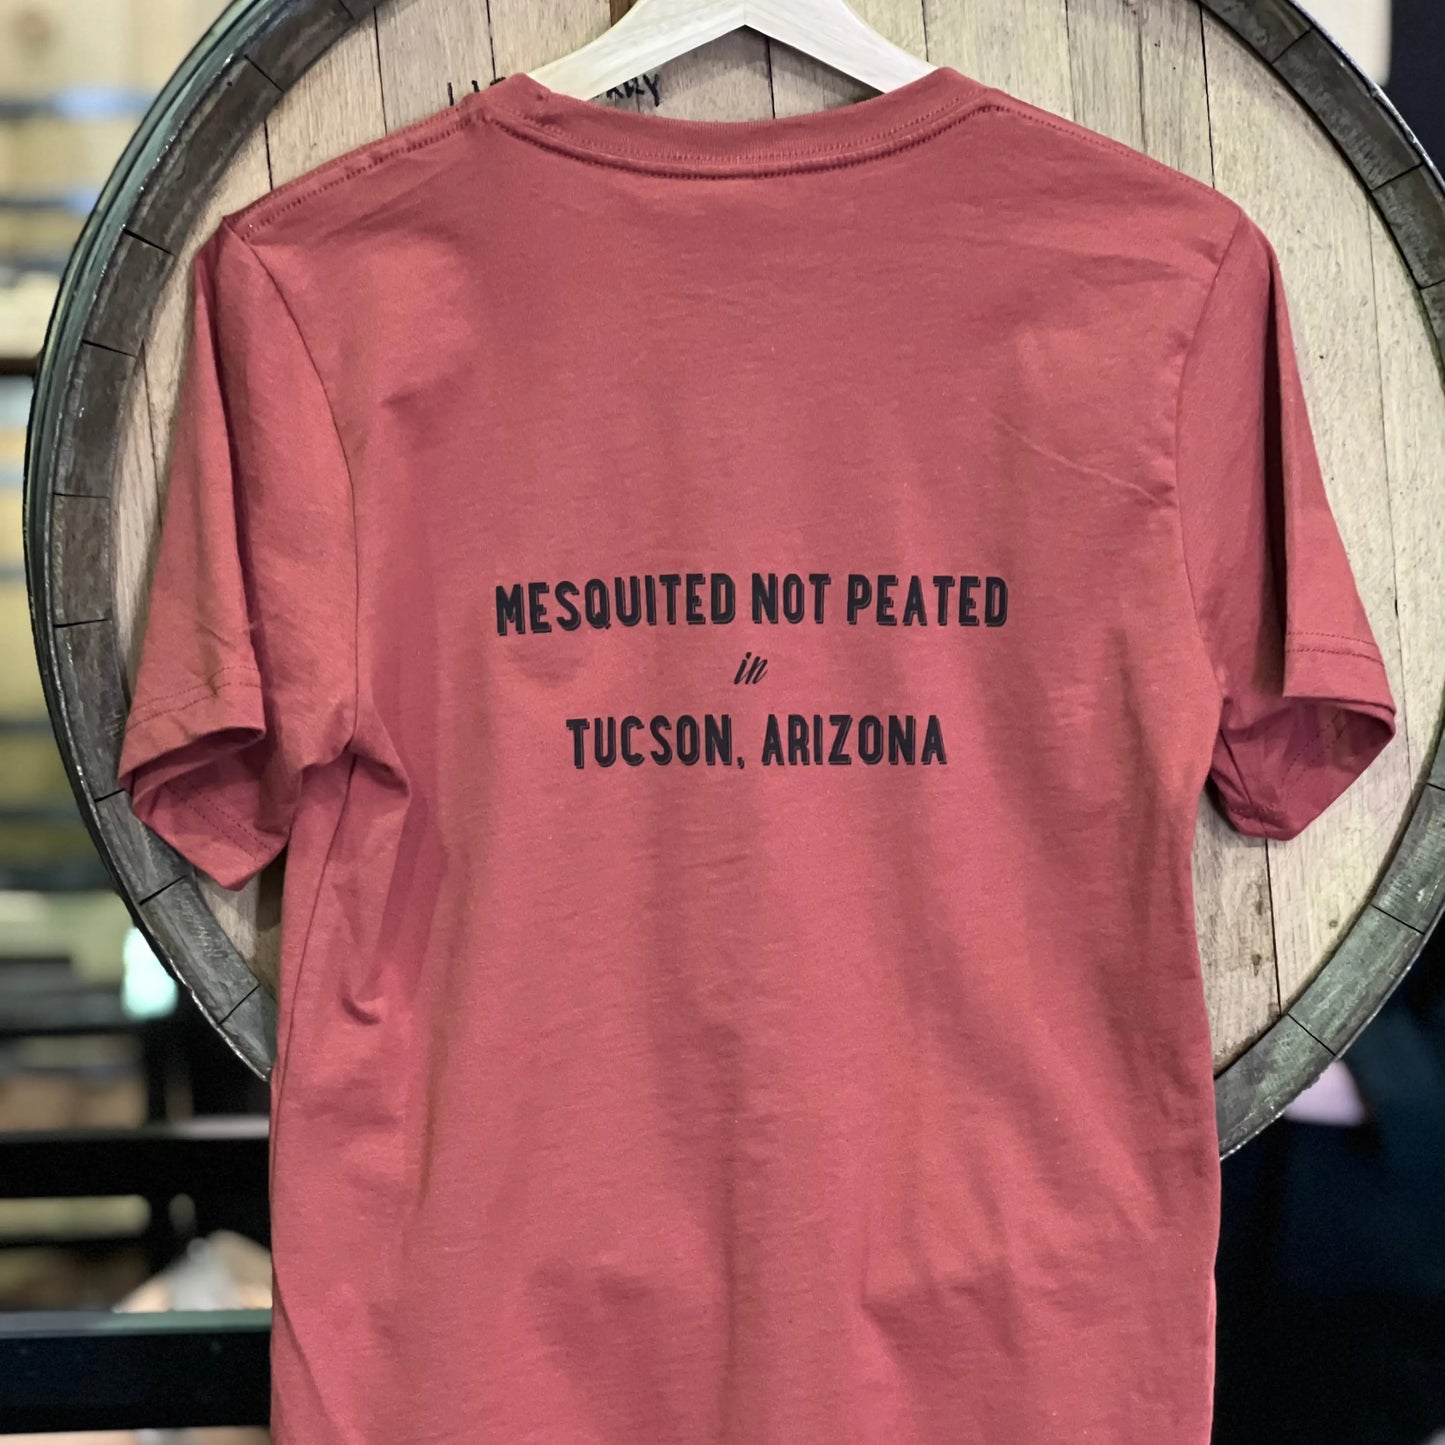 The back of the Whiskey Del Bac t-shirt that says mesquited not peated in Tucson, Arizona. 